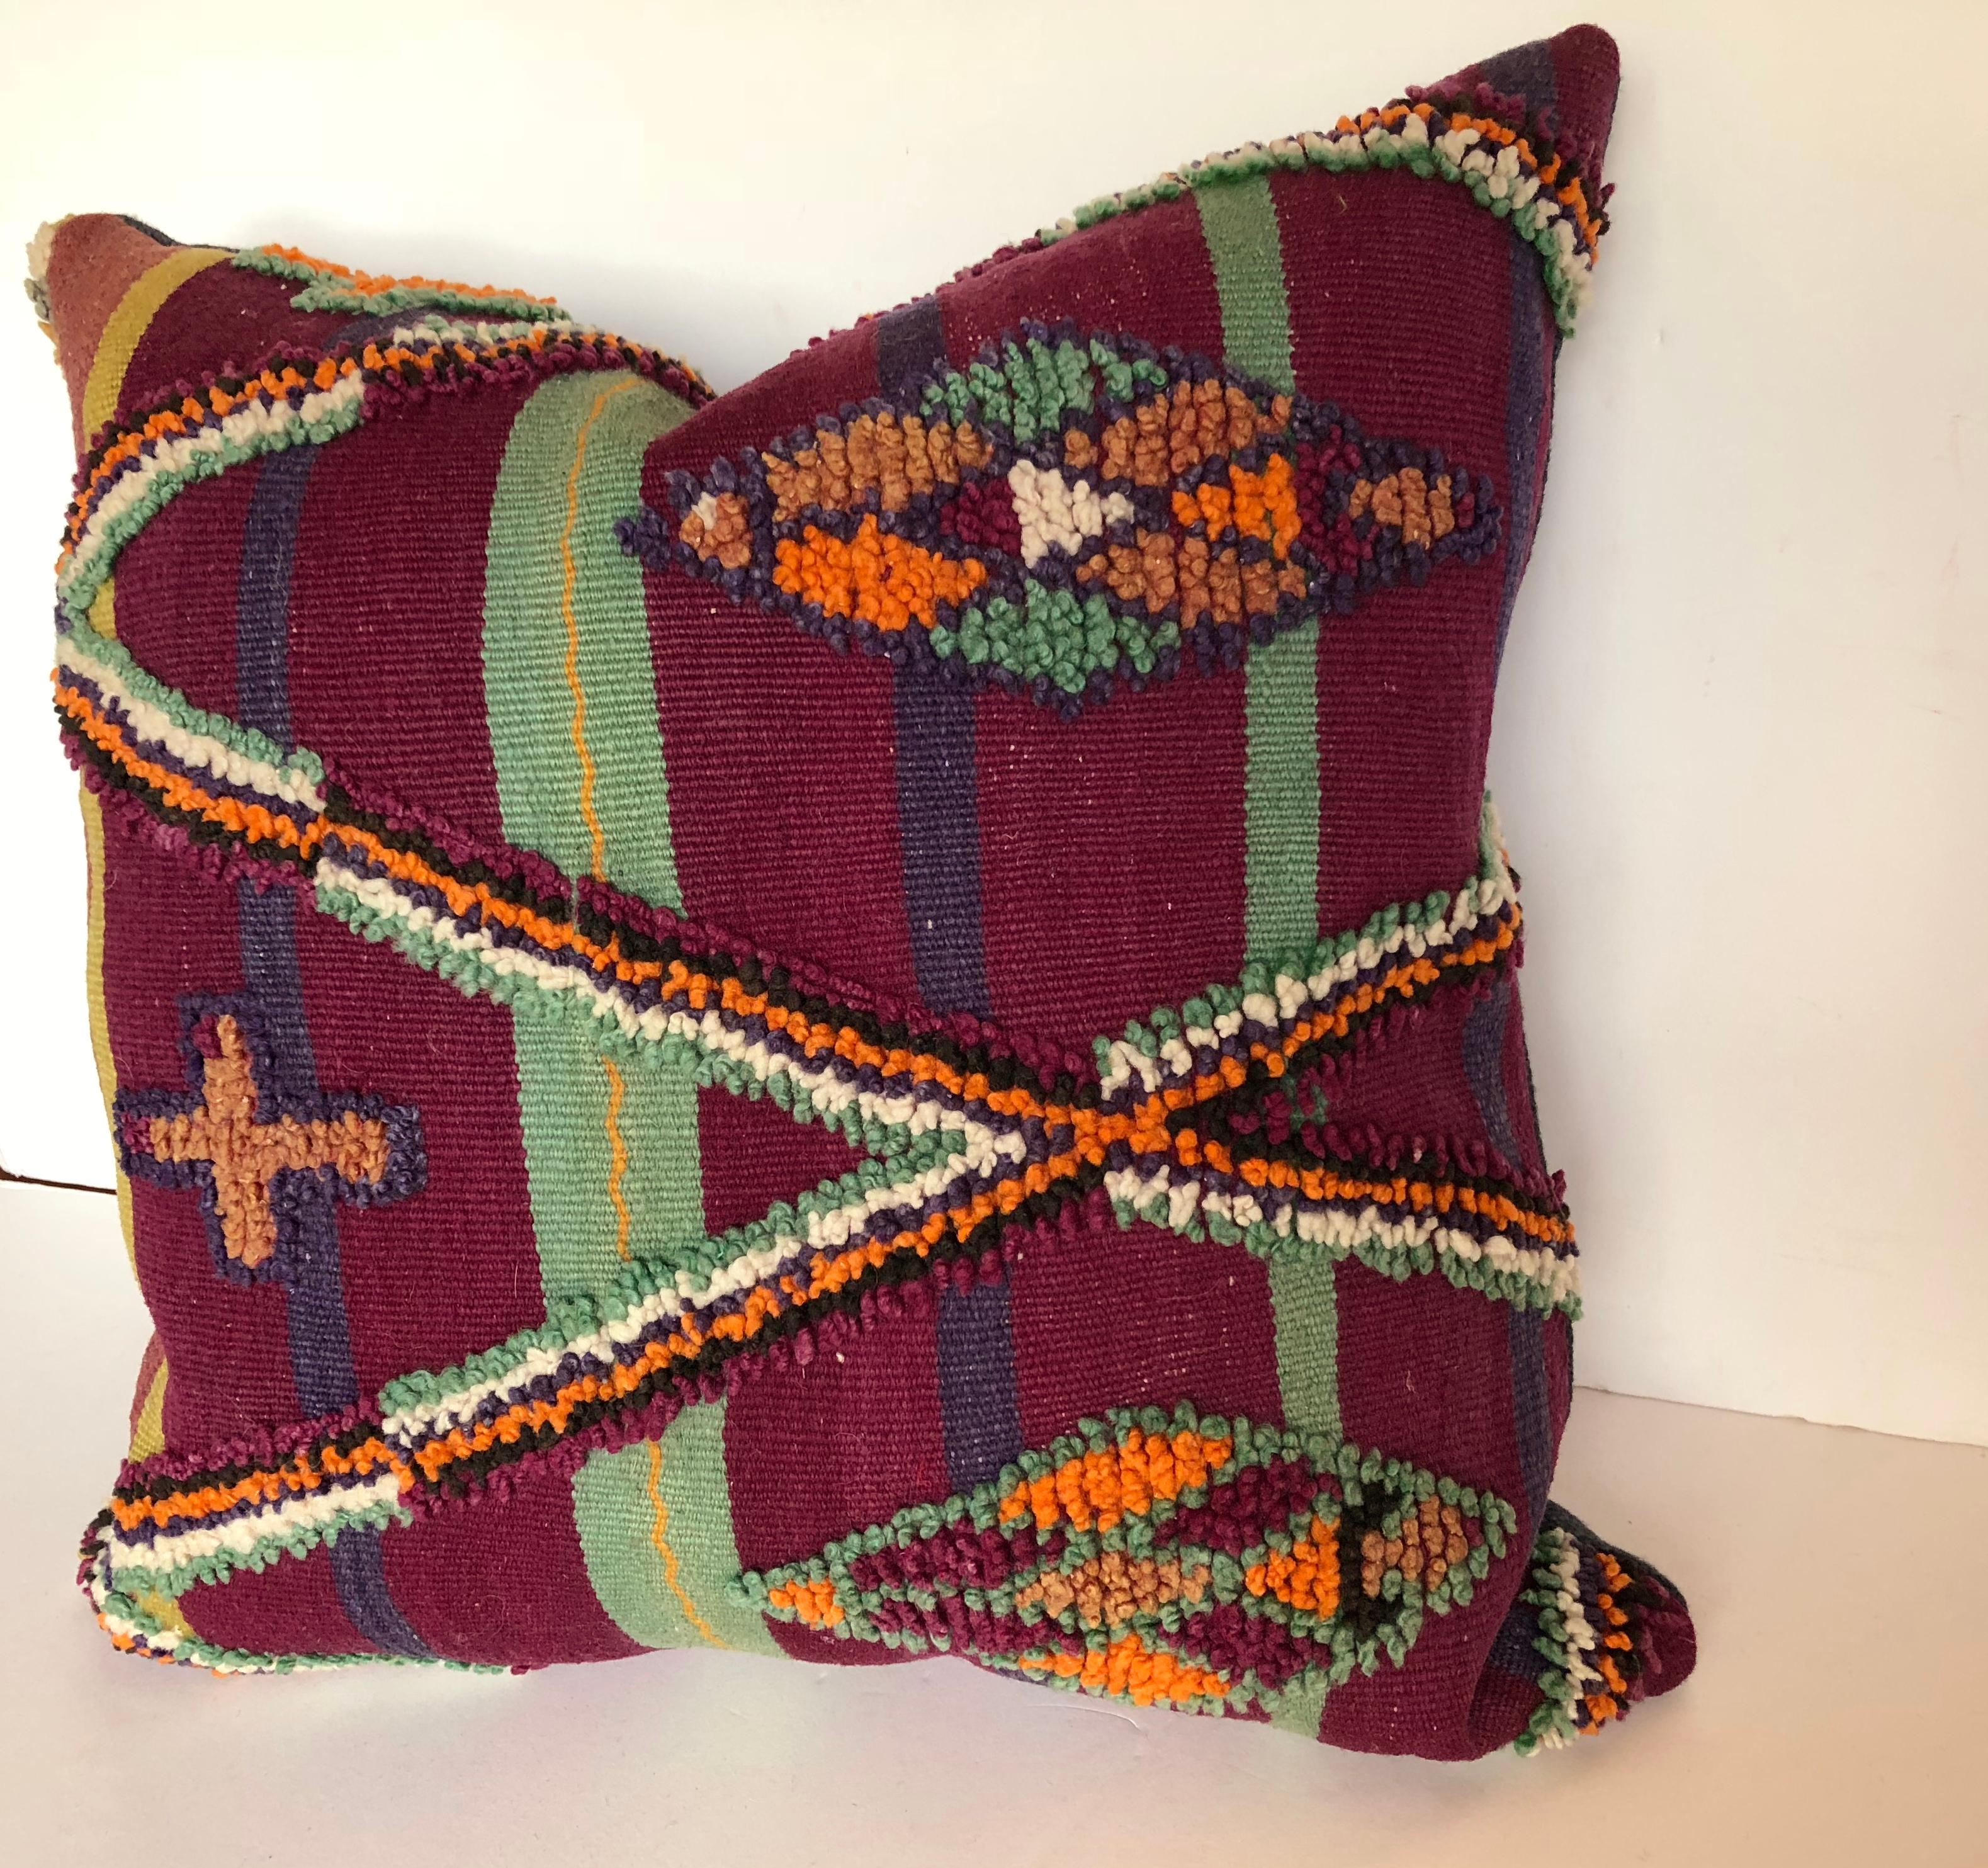 Custom pillow cut from a vintage hand loomed wool Moroccan Berber rug made in the Atlas Mountains. Wool is soft and lustrous with good color. Woven stripes are embellished with tufted tribal designs. Pillow is backed in a deep blue linen, filled